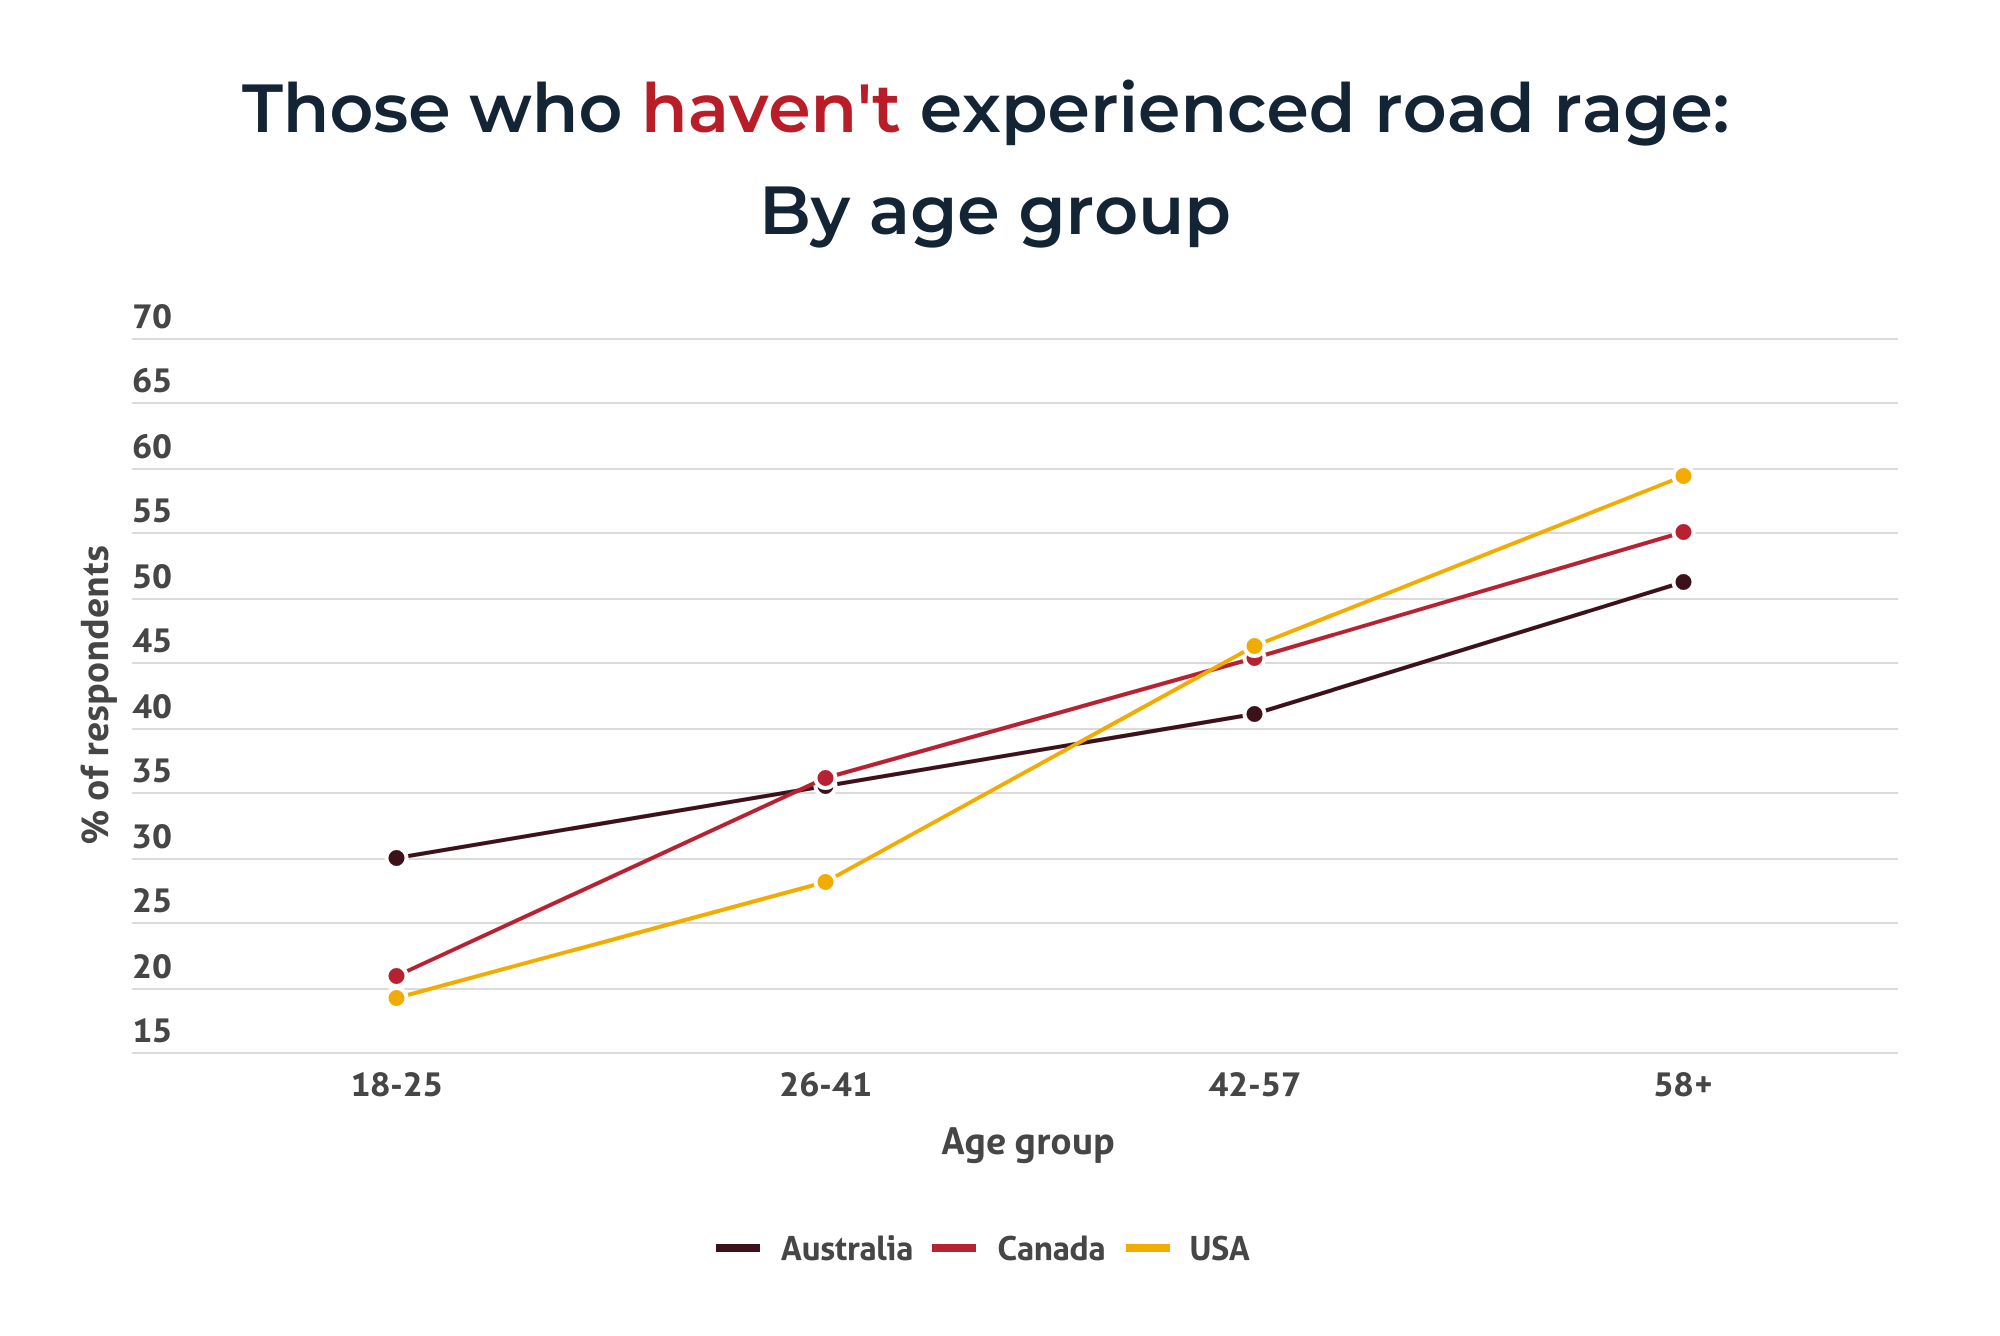 a line chart of people who have not experienced road rage by age-group in Australia, Canada and the USA